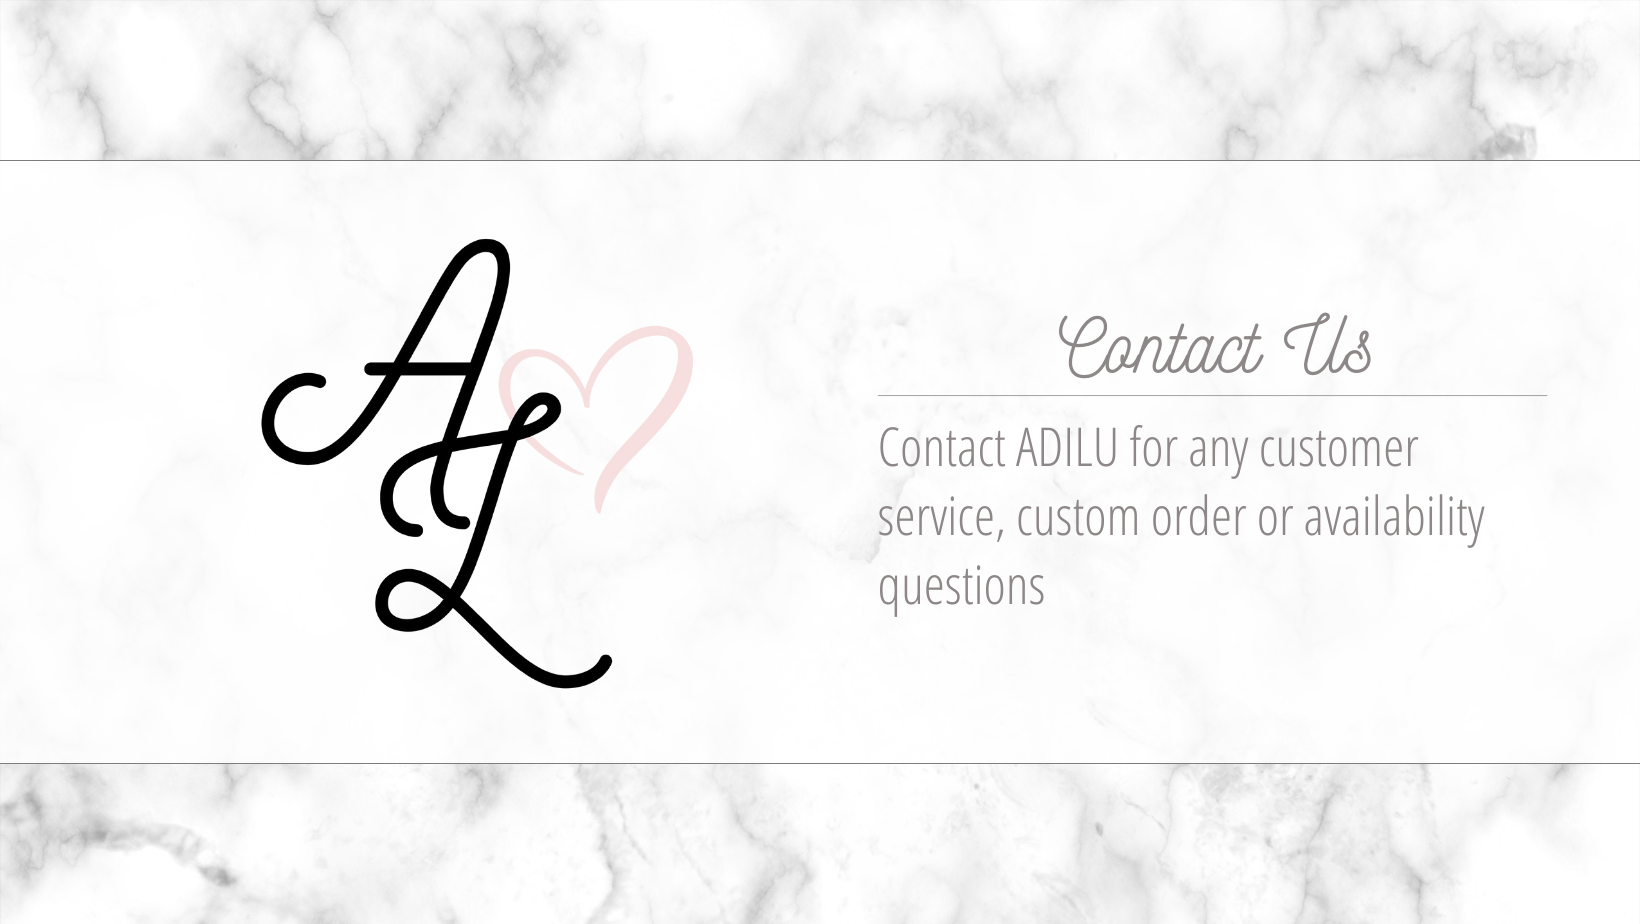 Contact ADILU for any customer service, custom order or availability questions